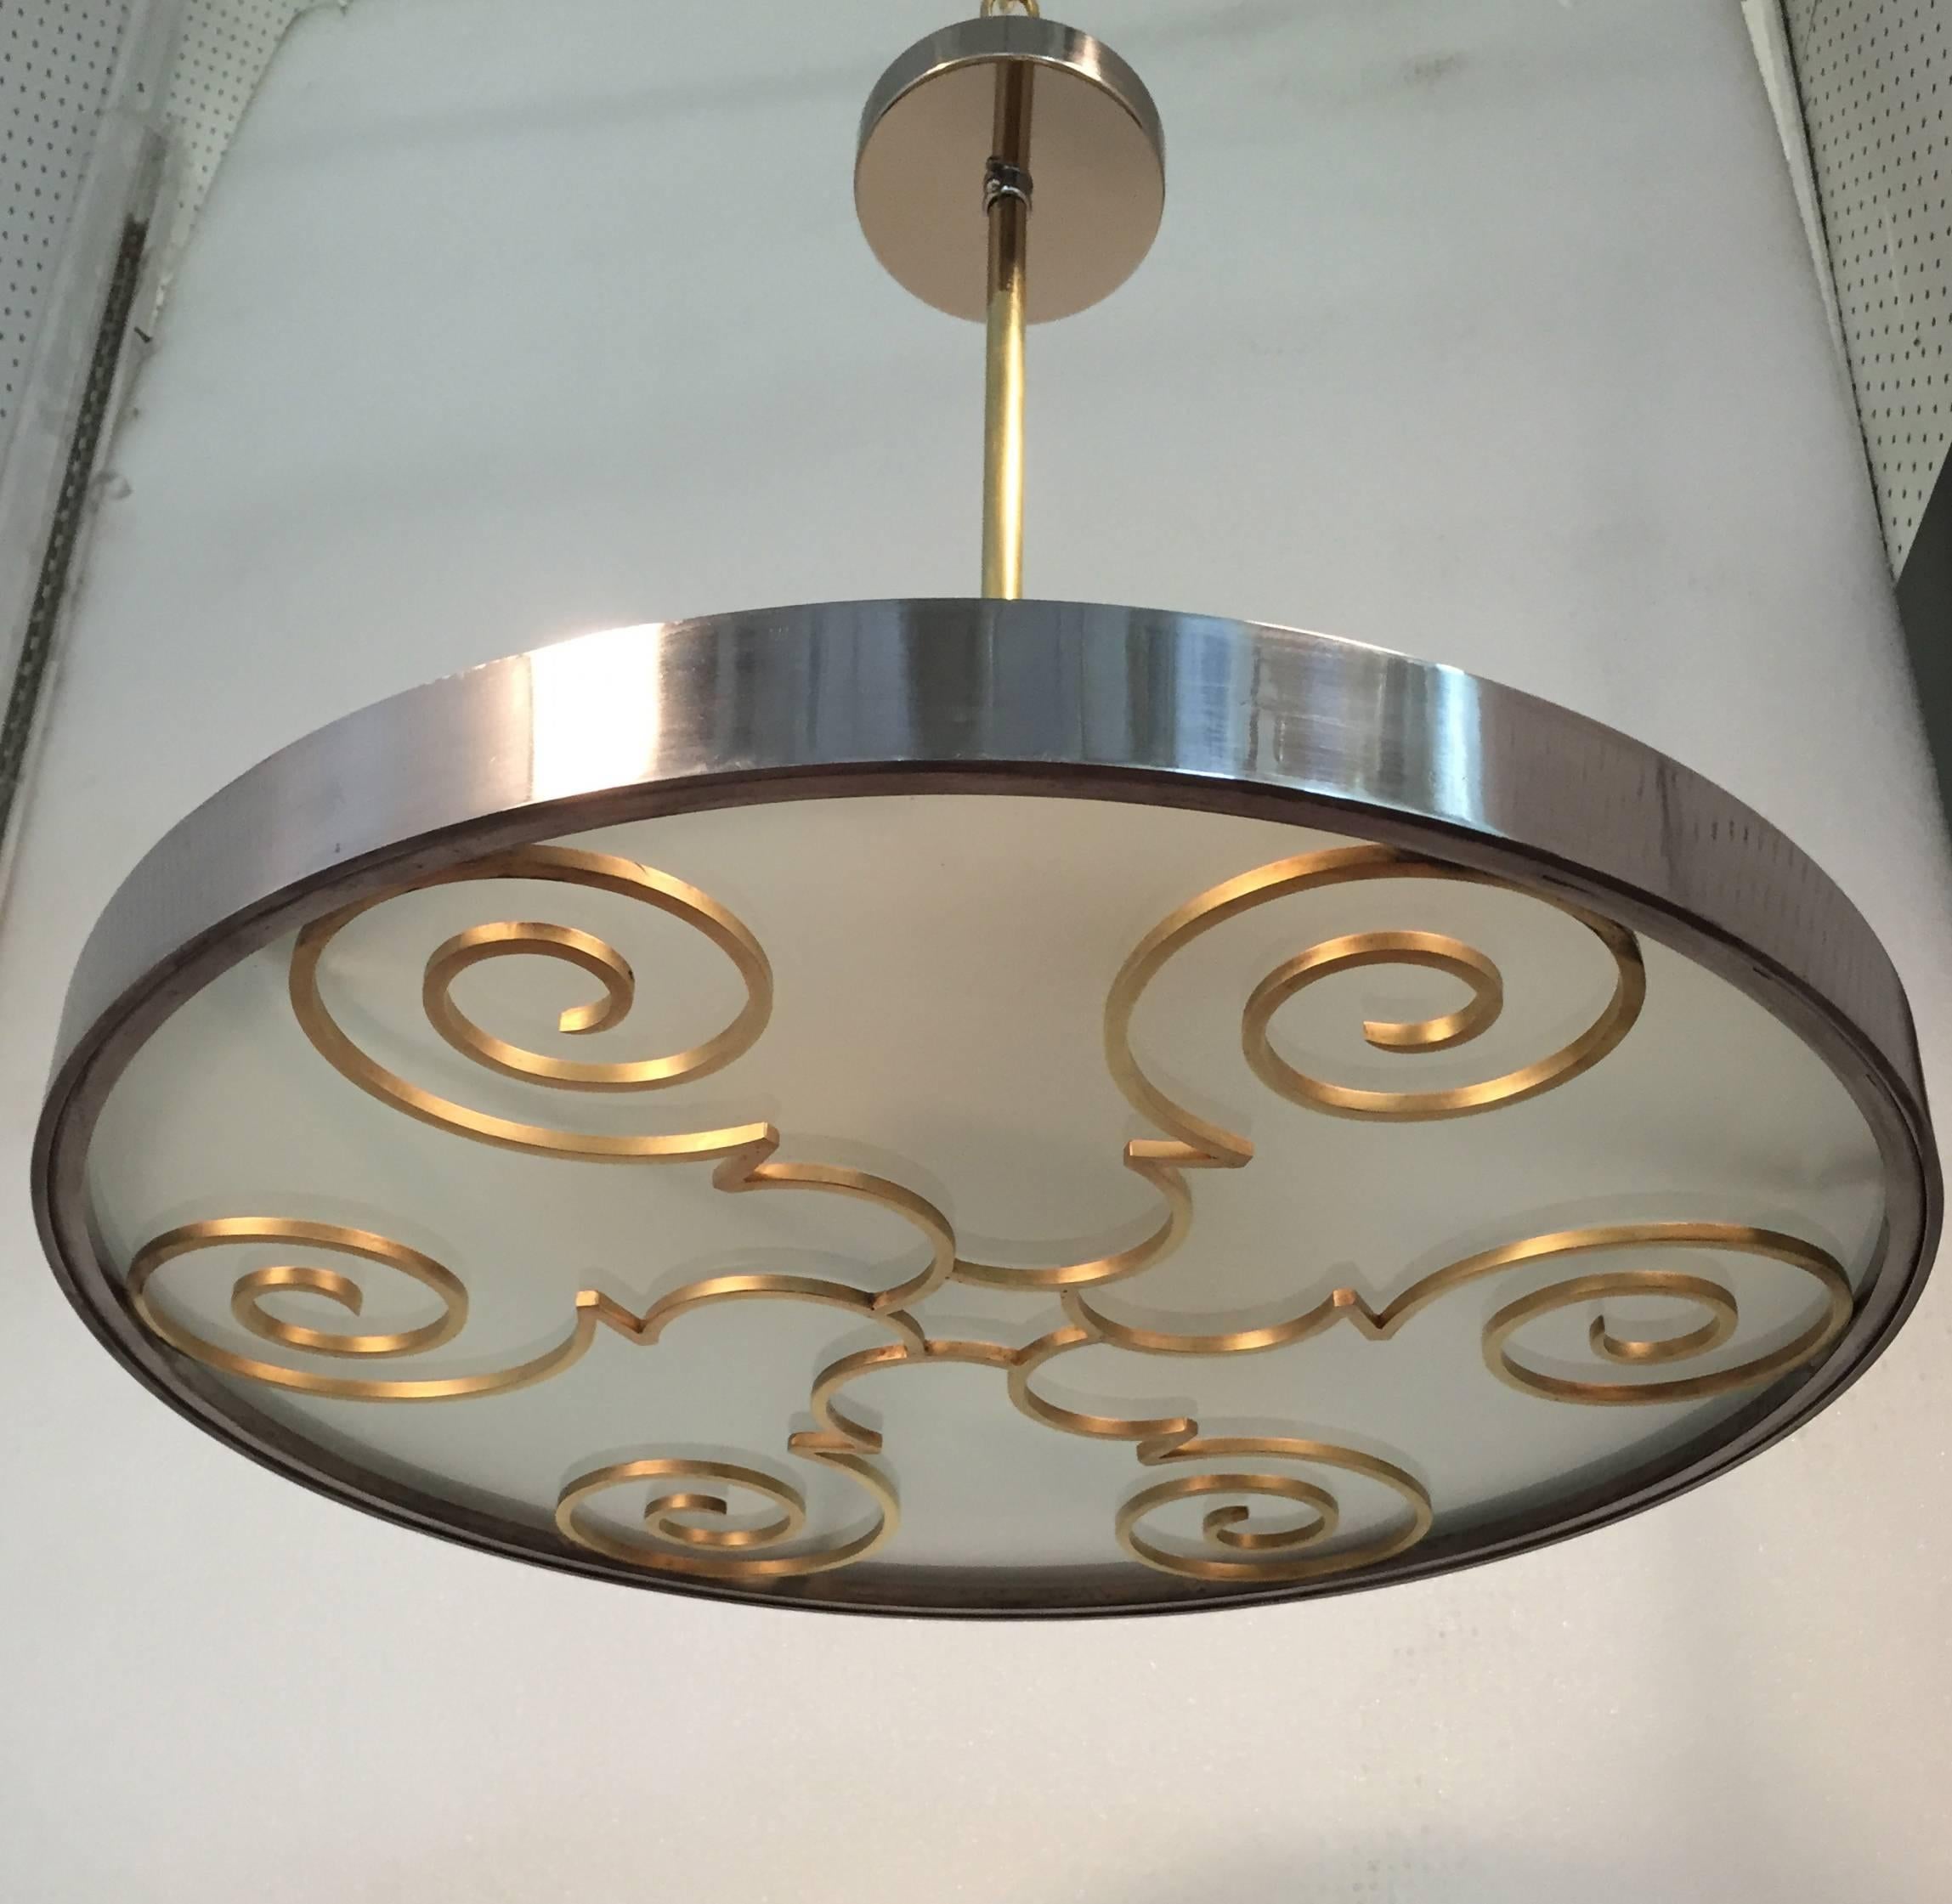 A chandelier by Lars Holmstrӧm for Arvika Konsthantverk,
circa 1930s.
Glass, brass and steel. Three lamp holders with Edison sockets.
Newly rewired. Can be mounted with or without stem.
Measure: Diameter 22.2